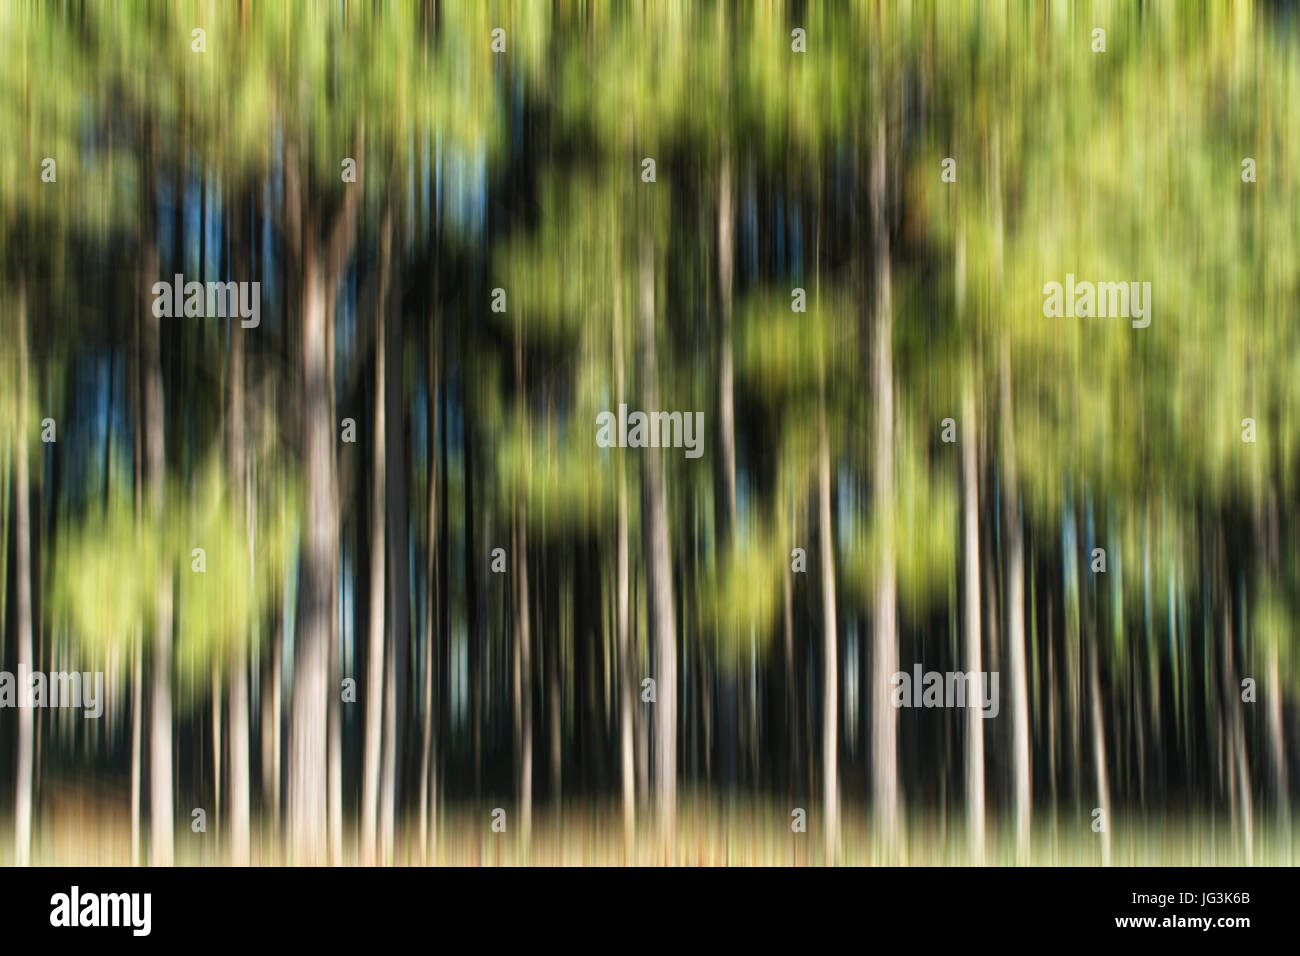 Abstract motion blurred trees in a forest Stock Photo